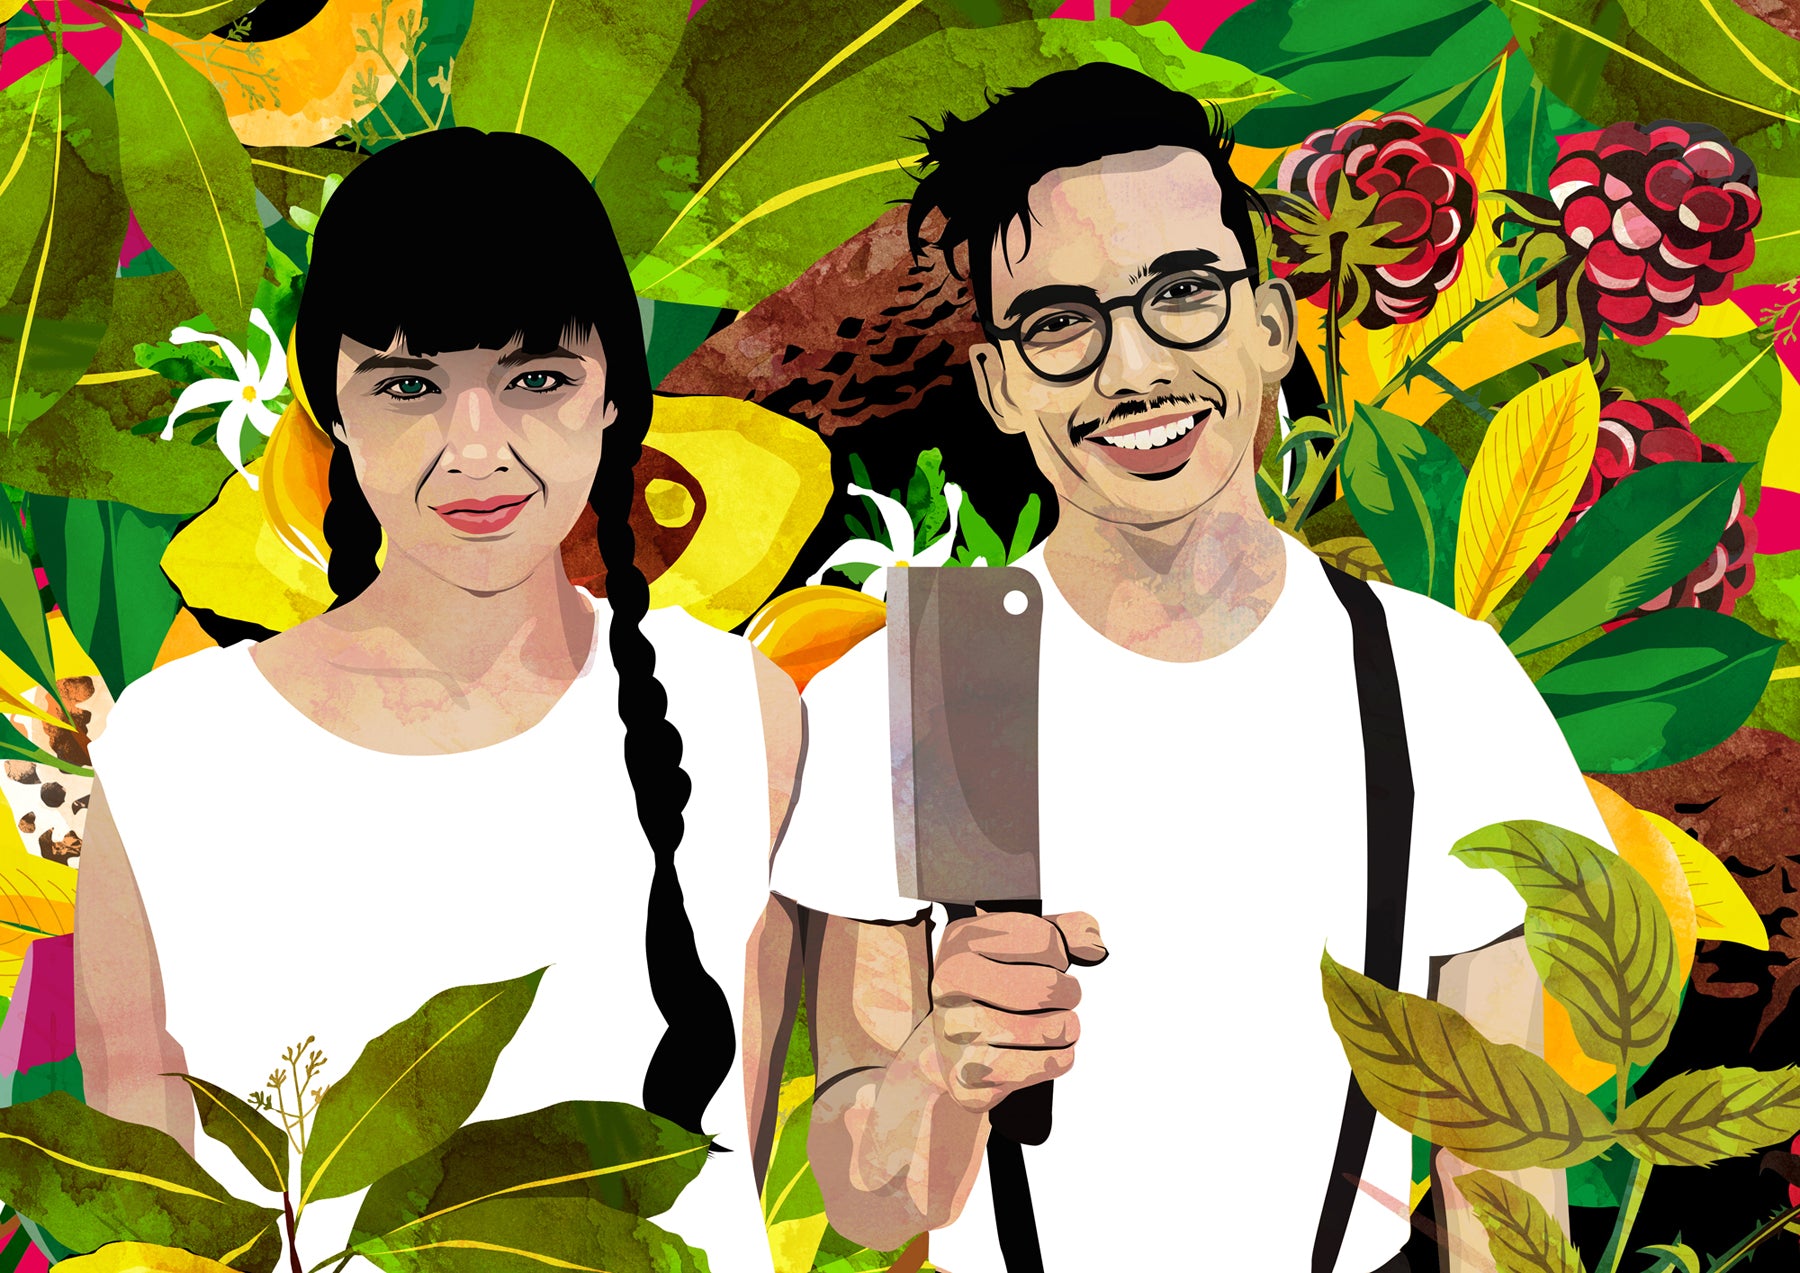 Illustration of Aubry and Kale Walch, founders of The Herbivorous Butcher, standing amongst lush, colourful plant life. Kale is holding up a cleaver.